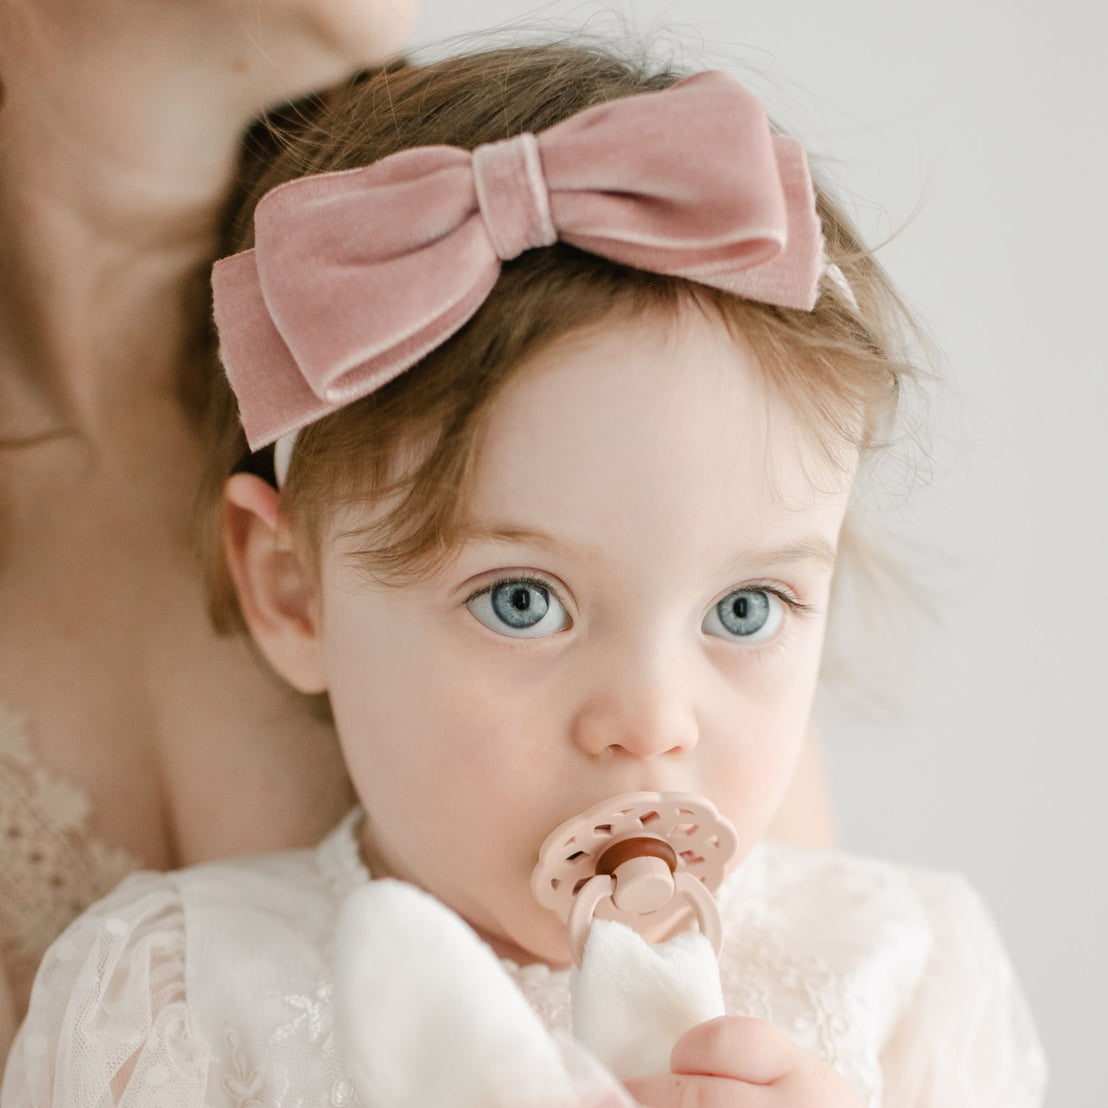 A close-up of a baby with big blue eyes, wearing a pink bow headband and a white lace Elizabeth Pacifier Set | Blush & Ivory outfit, being held by an adult (partially visible).